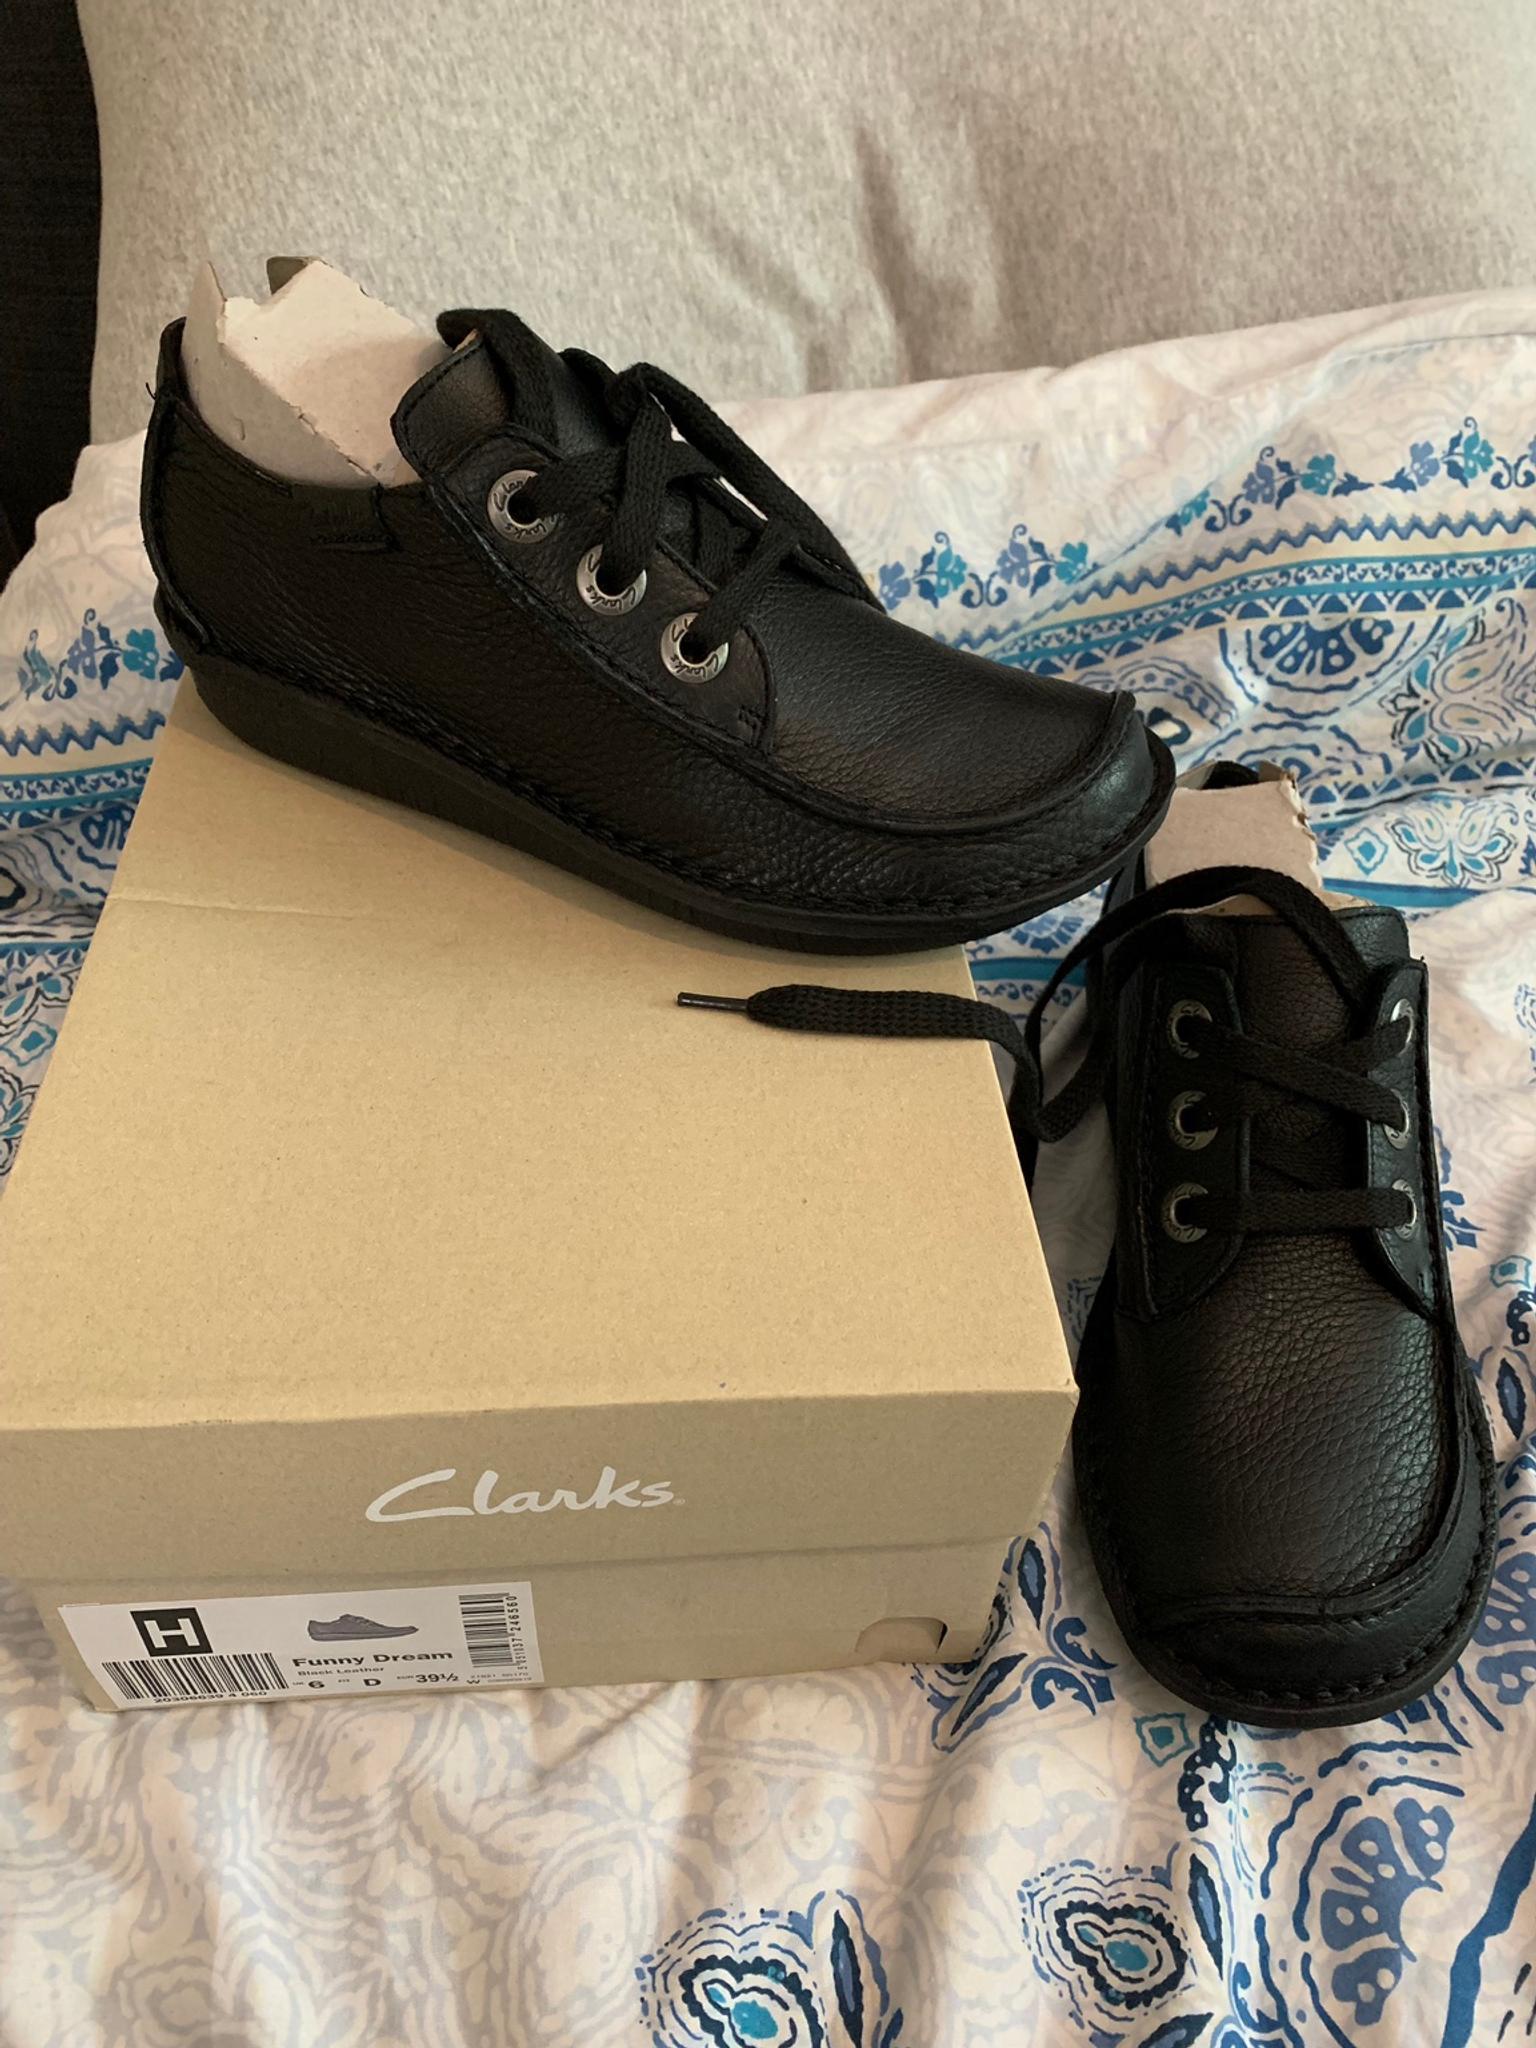 clarks funny dream size 6